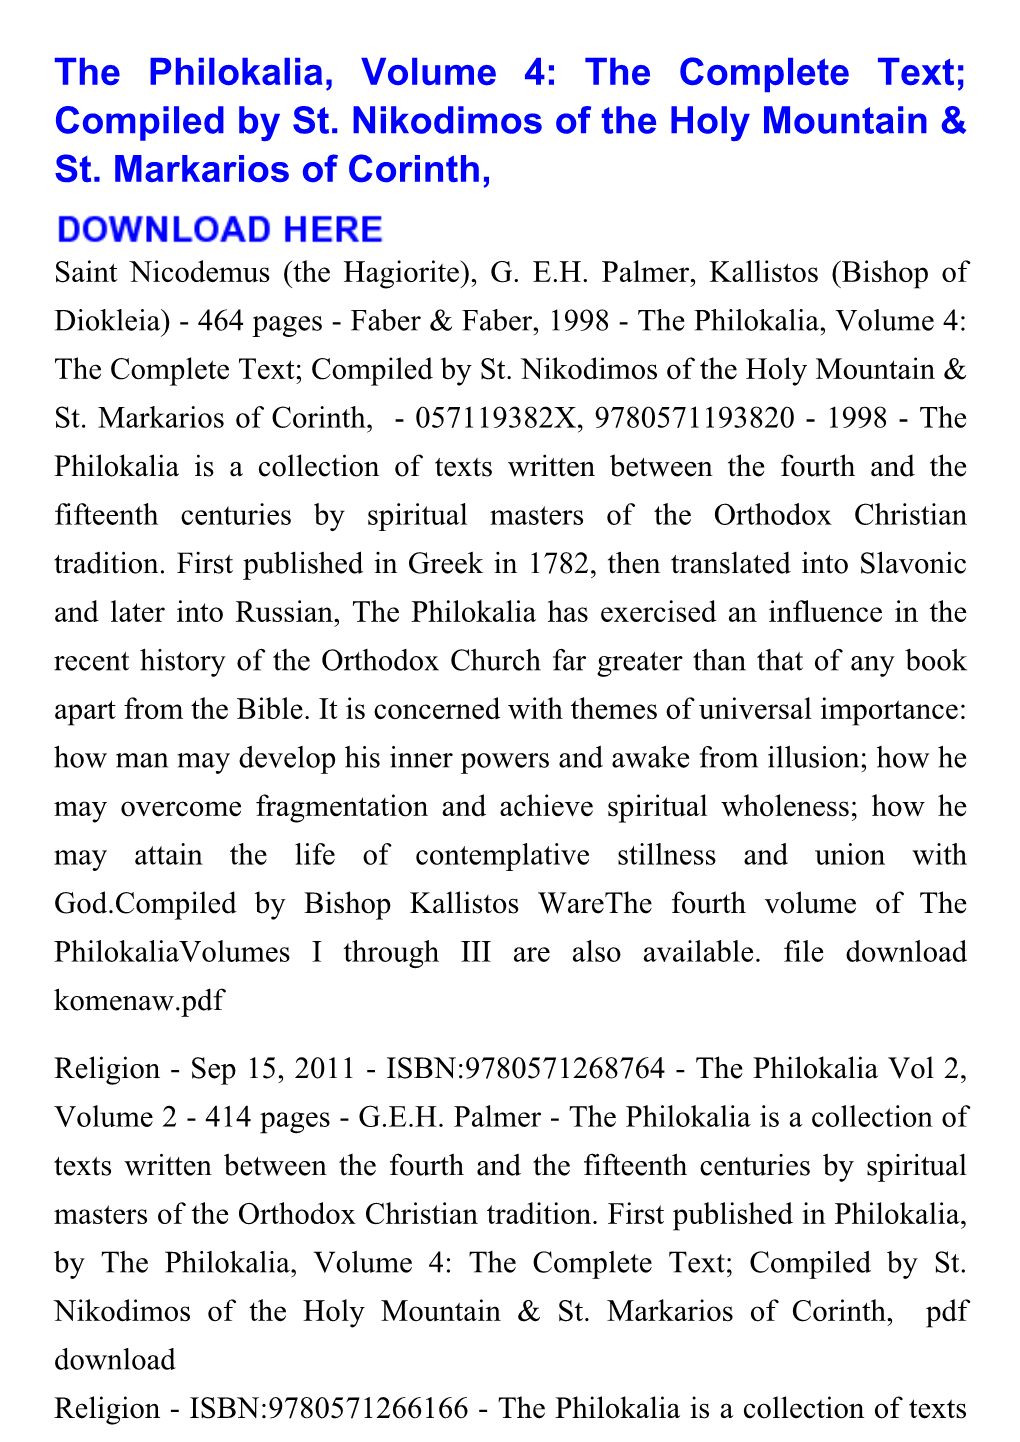 The Philokalia, Volume 4: the Complete Text; Compiled by St. Nikodimos of the Holy Mountain & St. Markarios of Corinth